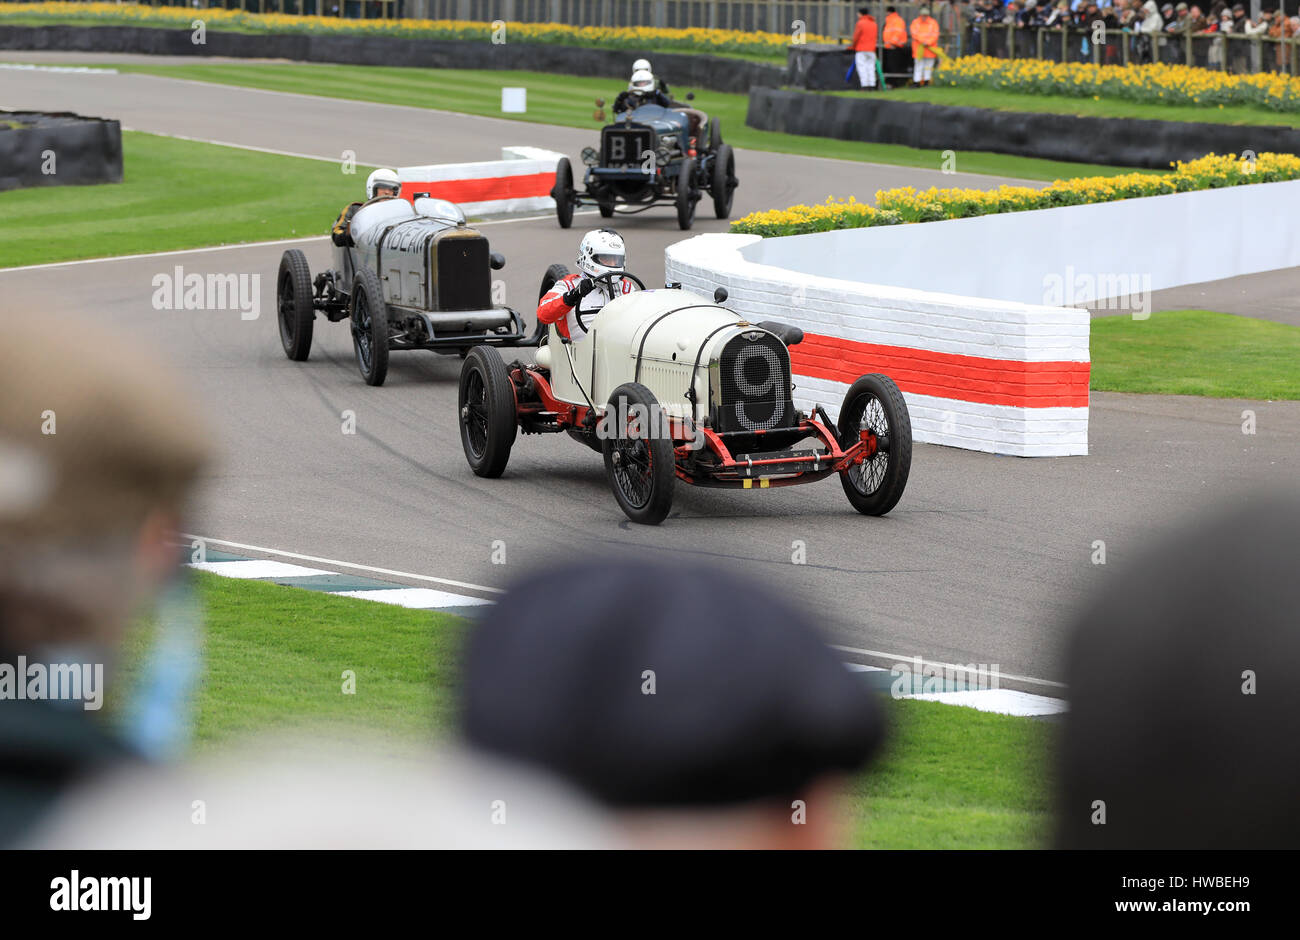 Chichester, Sussex, UK. 19th Mar, 2017. 1922 Bentley 3 litre TT - The S.F. Edge Tropy. The Goodwood Members' Meeting is a packed weekend of motor racing founded by Lord March, which aims to recreate the atmosphere and camaraderie of the original BARC Members' Meetings held at Goodwood throughout the Fifties and Sixties until the circuit closed for racing in 1966. Credit: Oliver Dixon/Alamy Live News Stock Photo